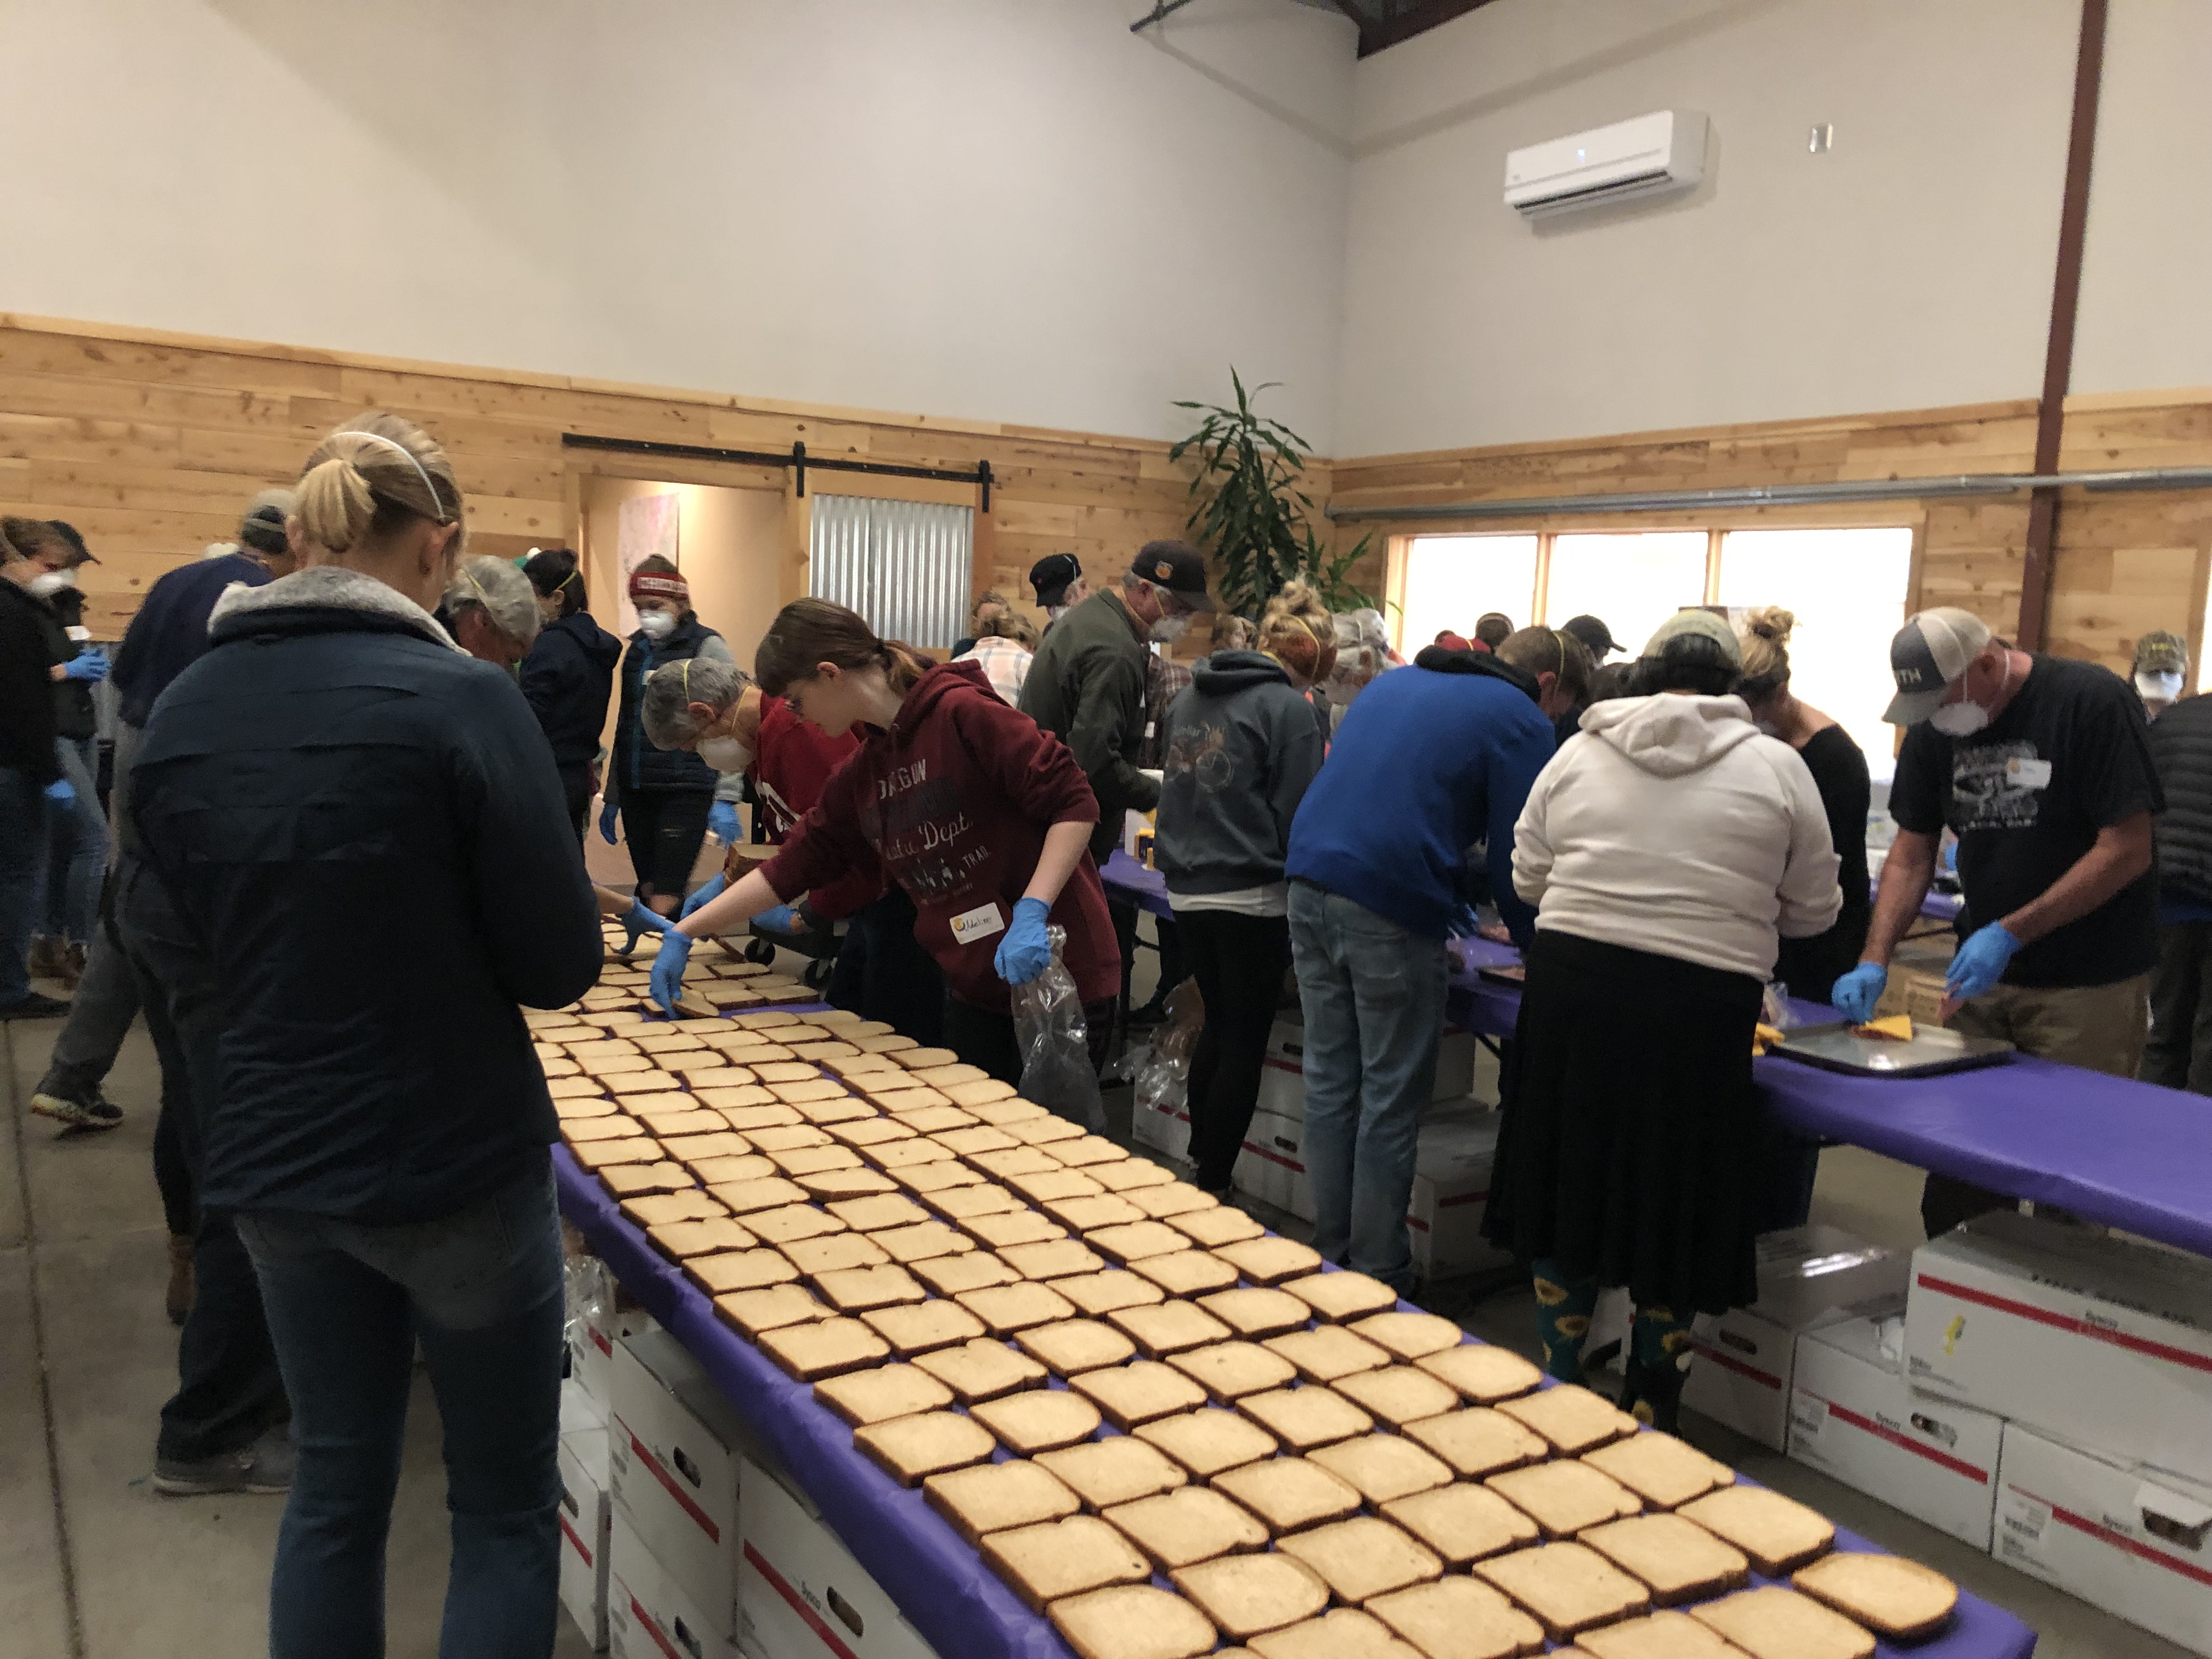 Volunteers working to assemble 1,200 sandwiches for firefighters, first responders, and shelter volunteers during the Camp Fire.